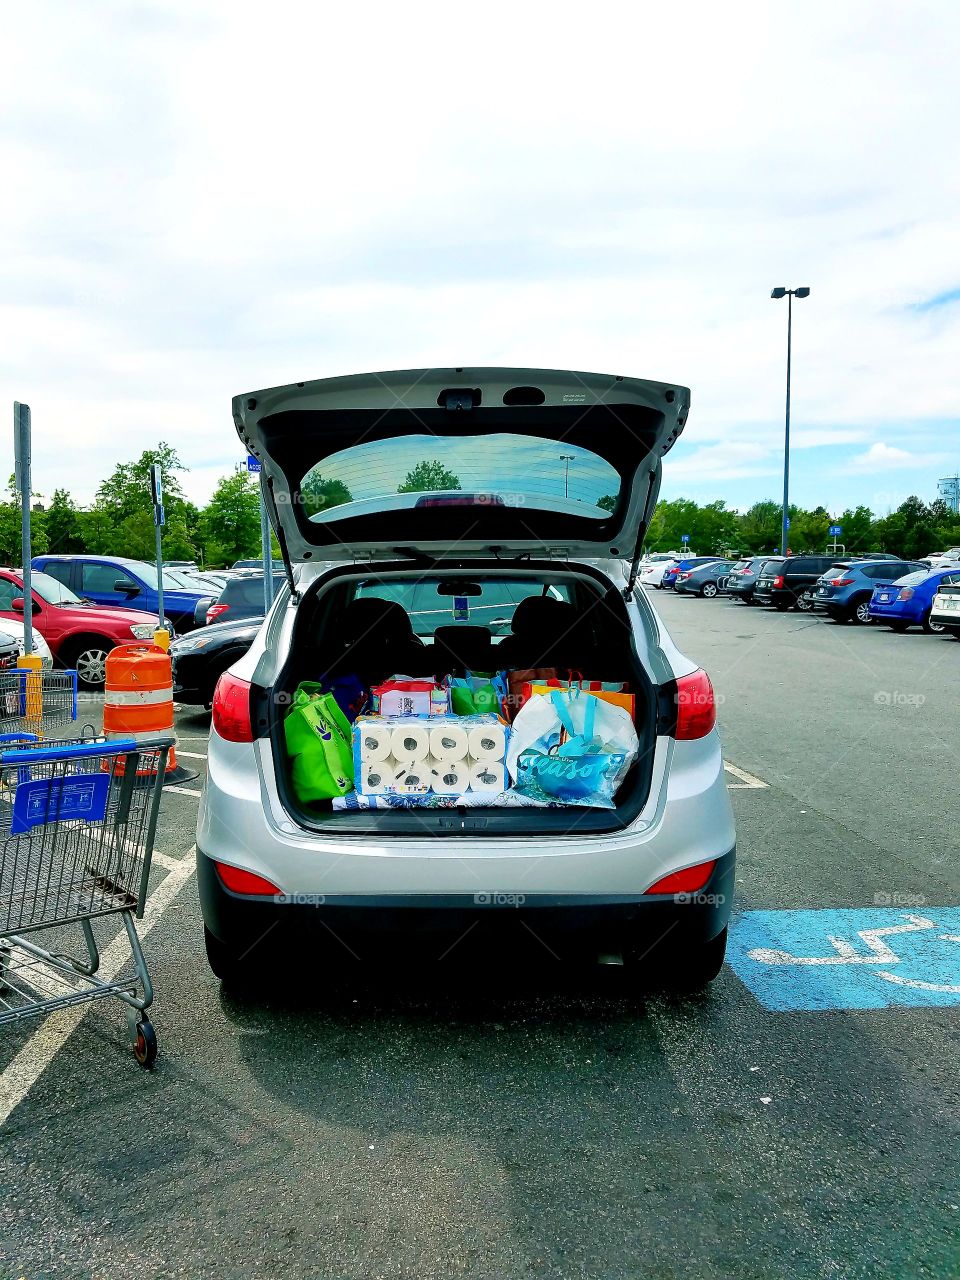 Shopping Bags in car, busy parking lot. Handicapped. Trunk open.